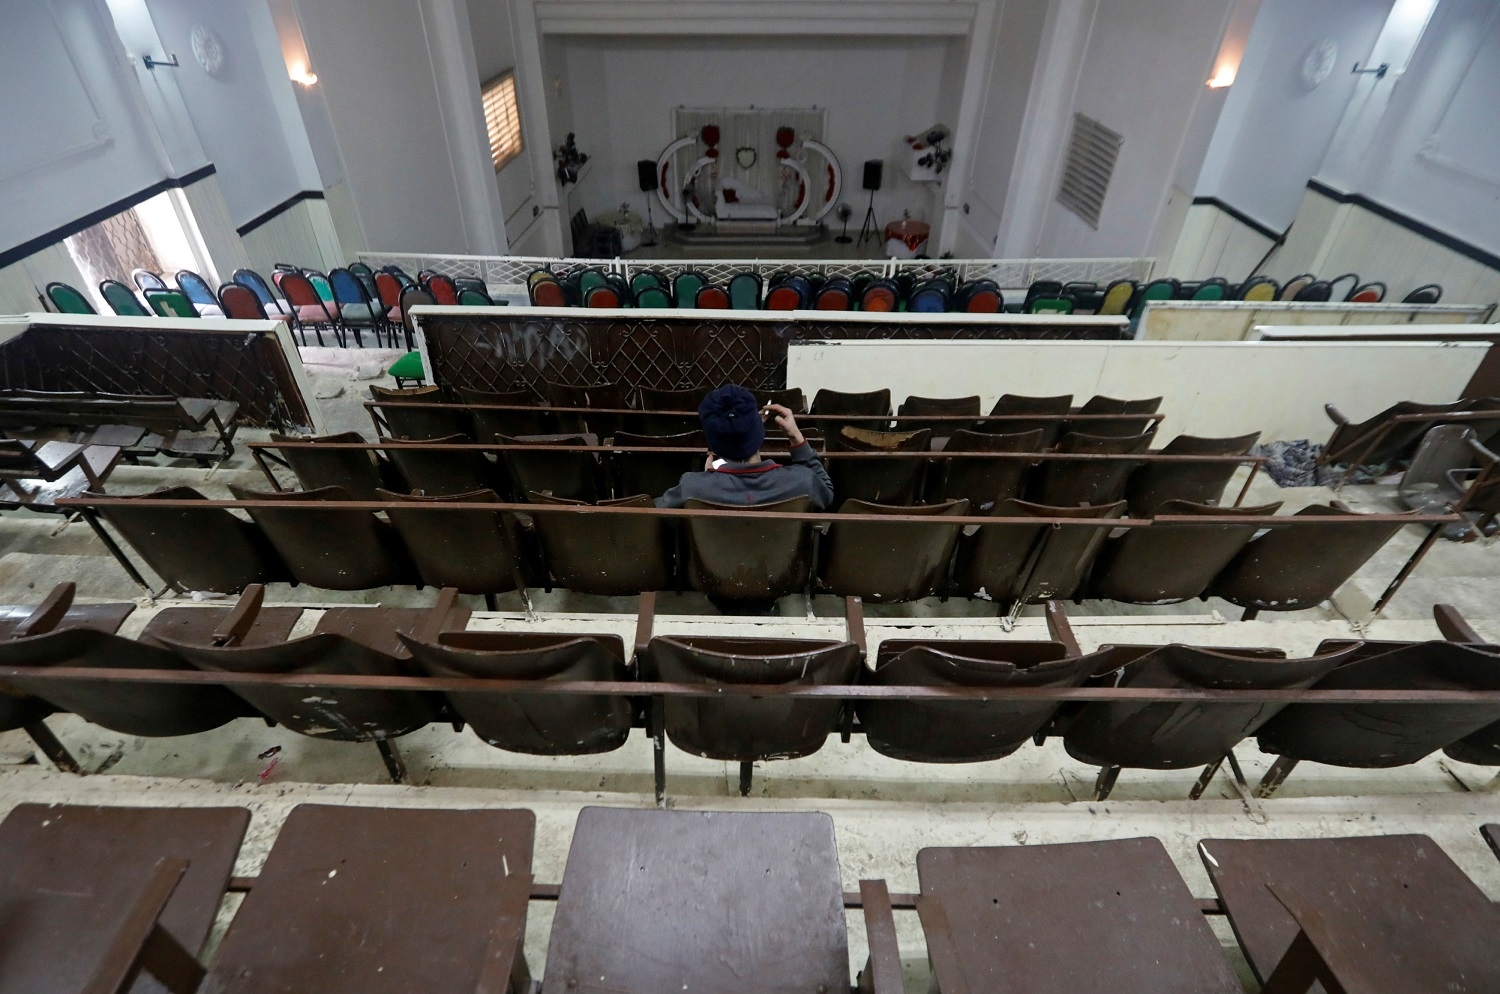 The cinema, one of the first in the West Bank, was originally opened by Abdel-Rahim Hanoun's father in 1965. Two years later Israel took control of the area during the 1967 Arab-Israeli war. (Reuters)